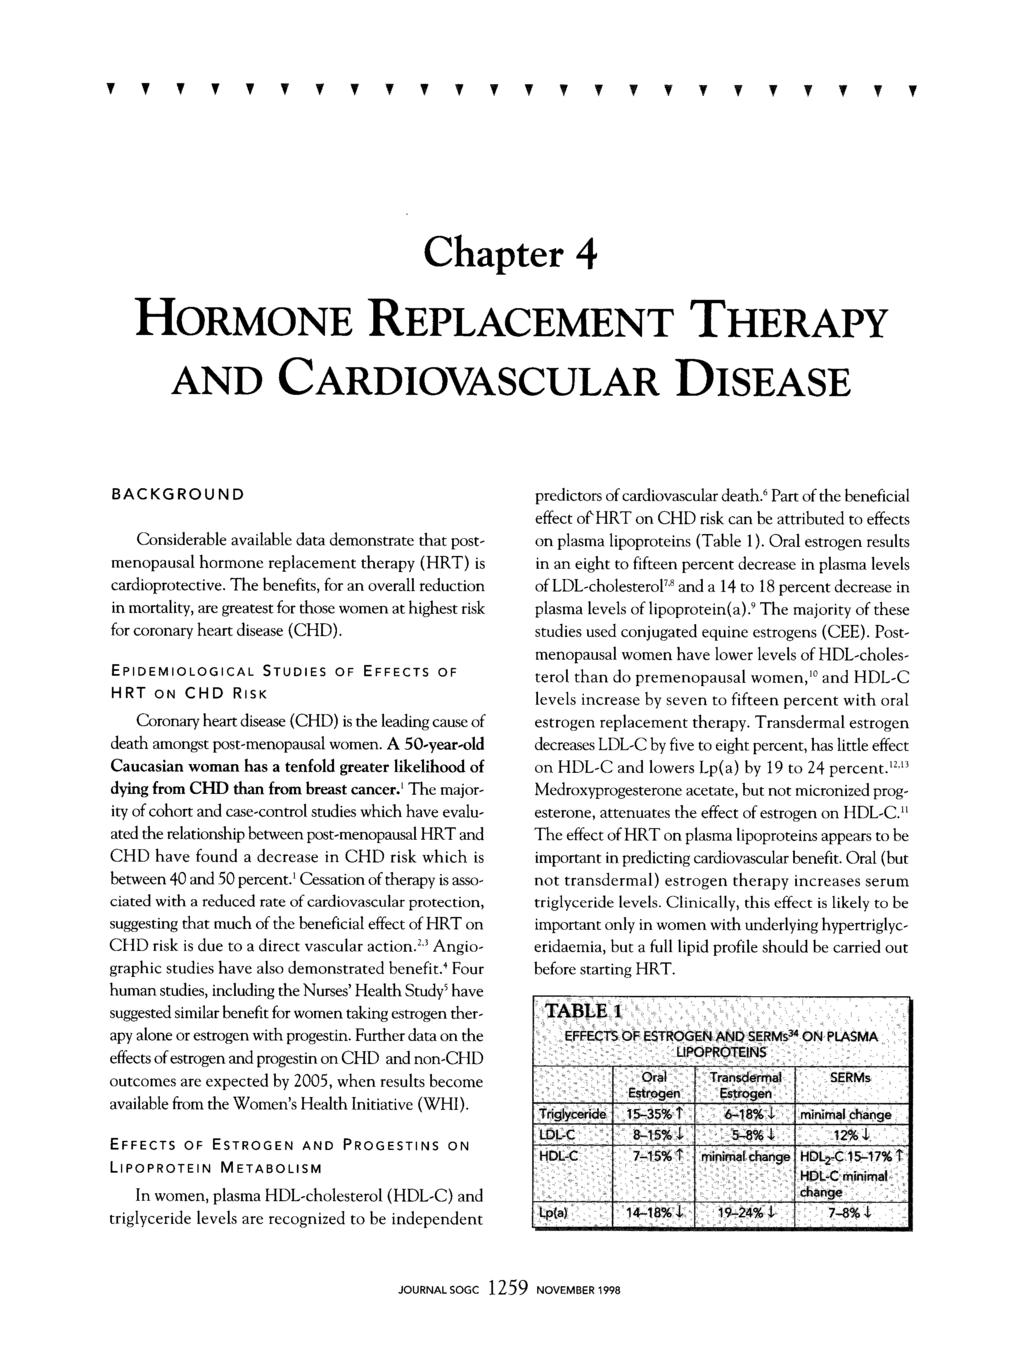 , Chapter 4 HORMONE REPLACEMENT THERAPY AND CARDIOVASCULAR DISEASE BACKGROUND Considerable available data demonstrate that postmenopausal hormone replacement therapy (HR T) is cardioprotective.